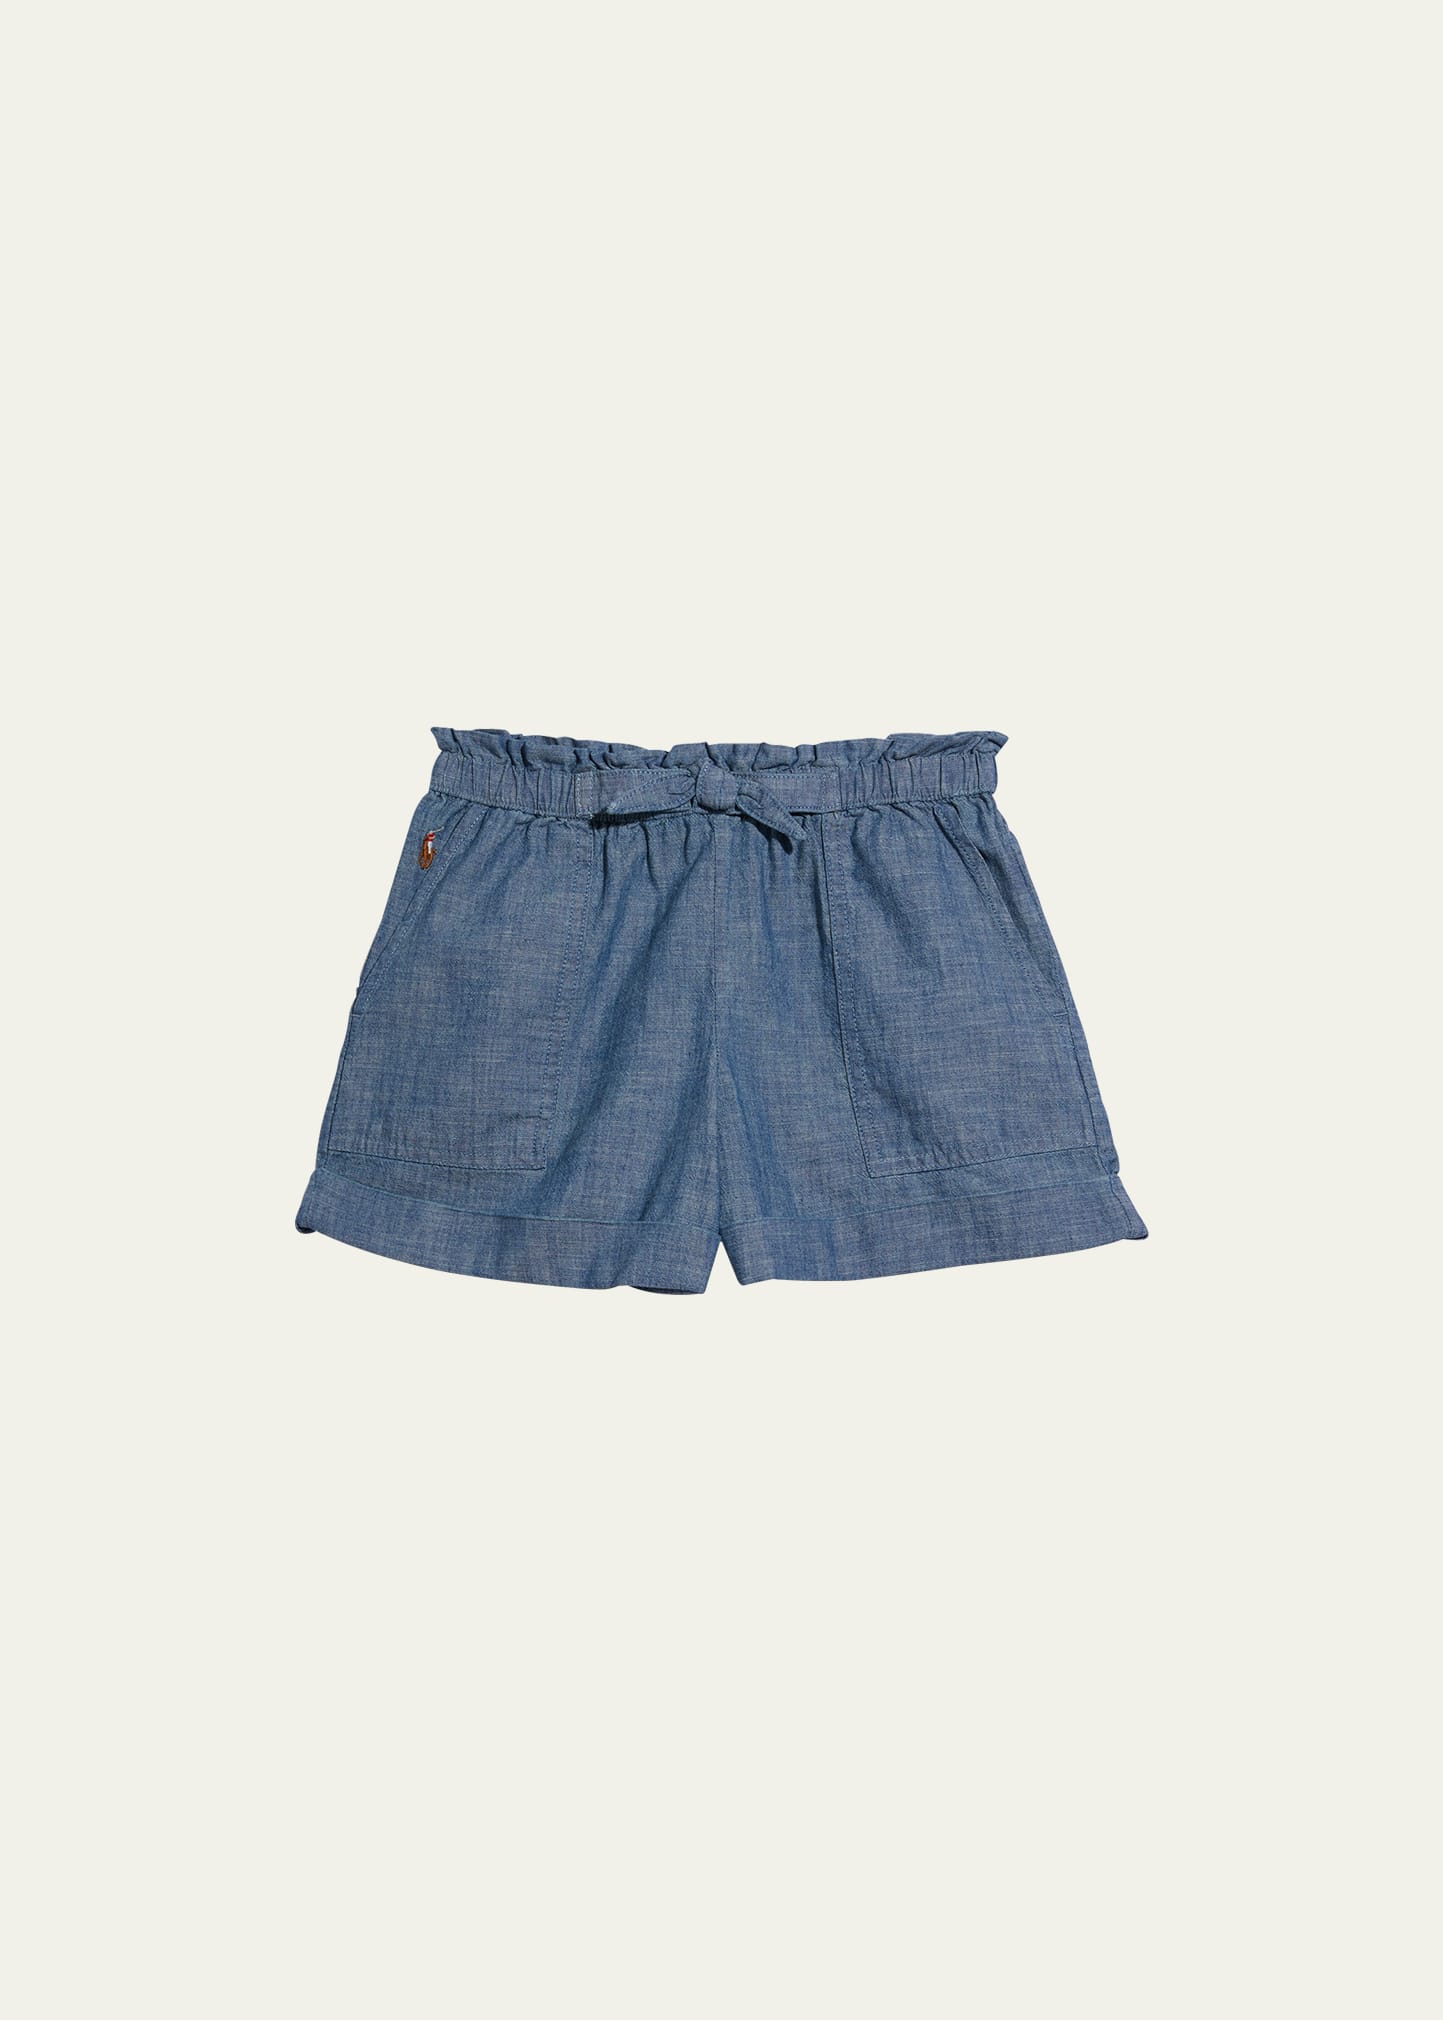 Girl's Cotton Chambray Camp Shorts, Size 7-14